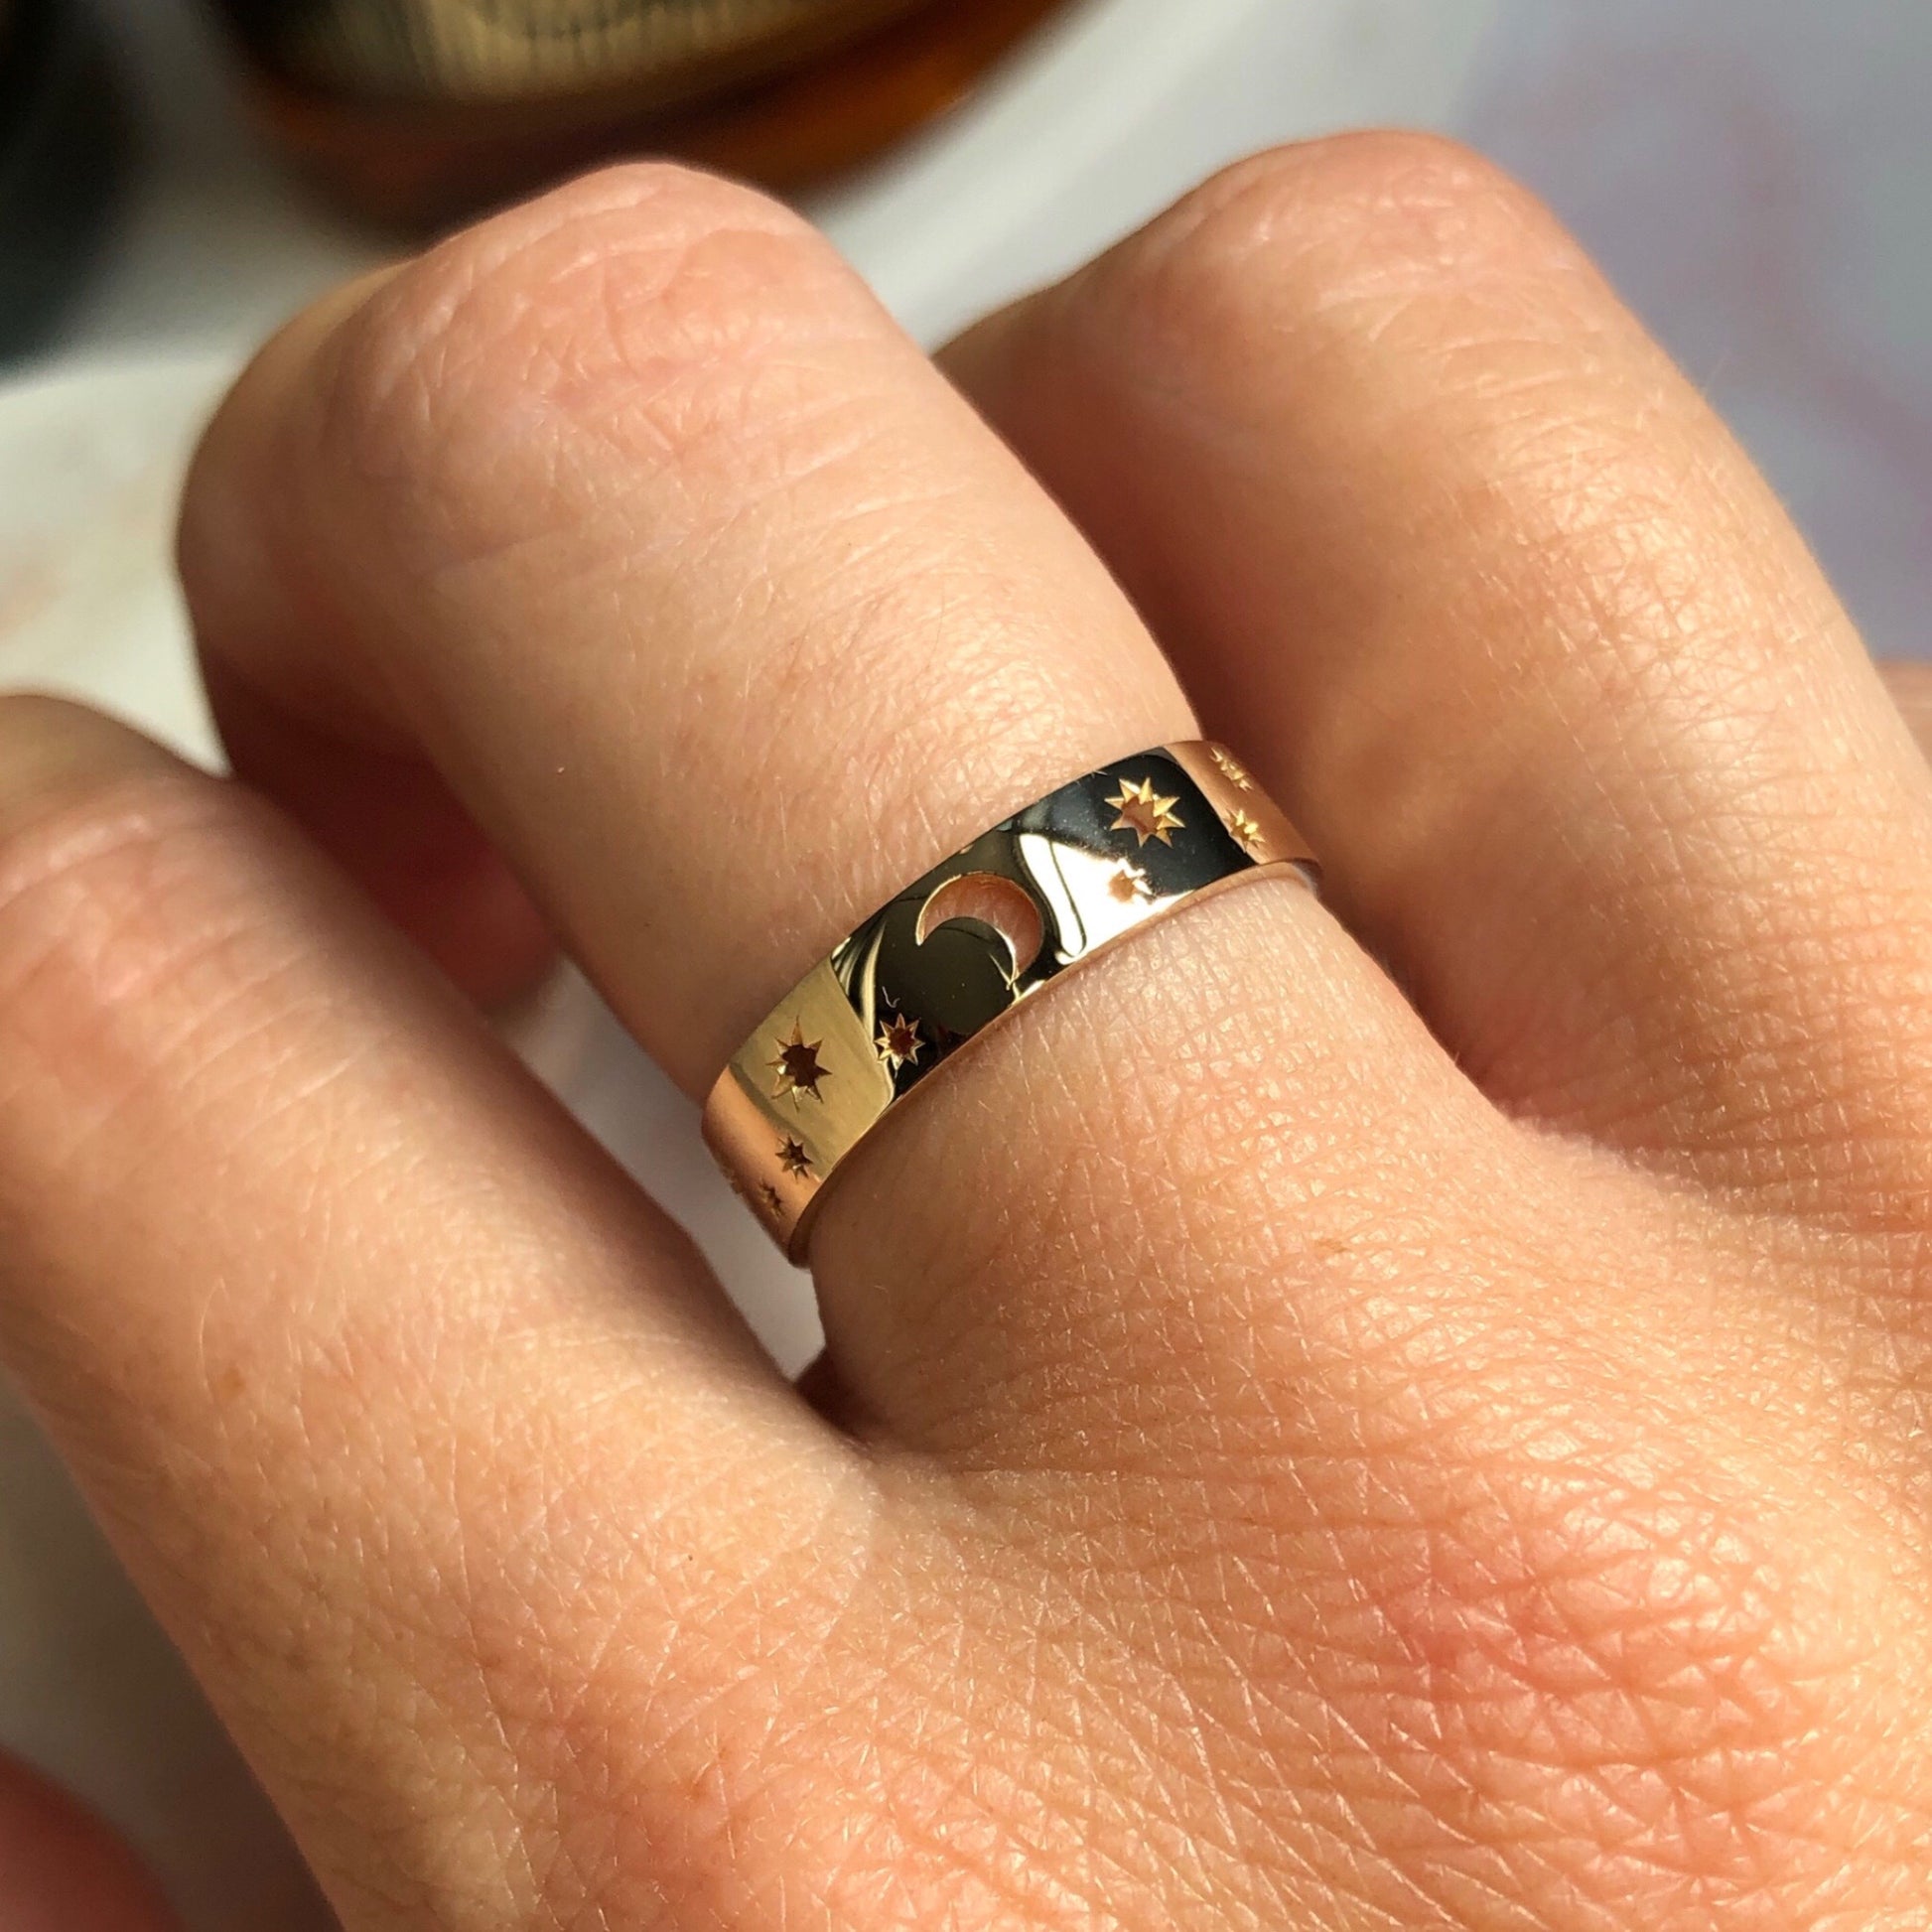 10kt solid gold celestial ring with stars and moon motif, modelled on hand